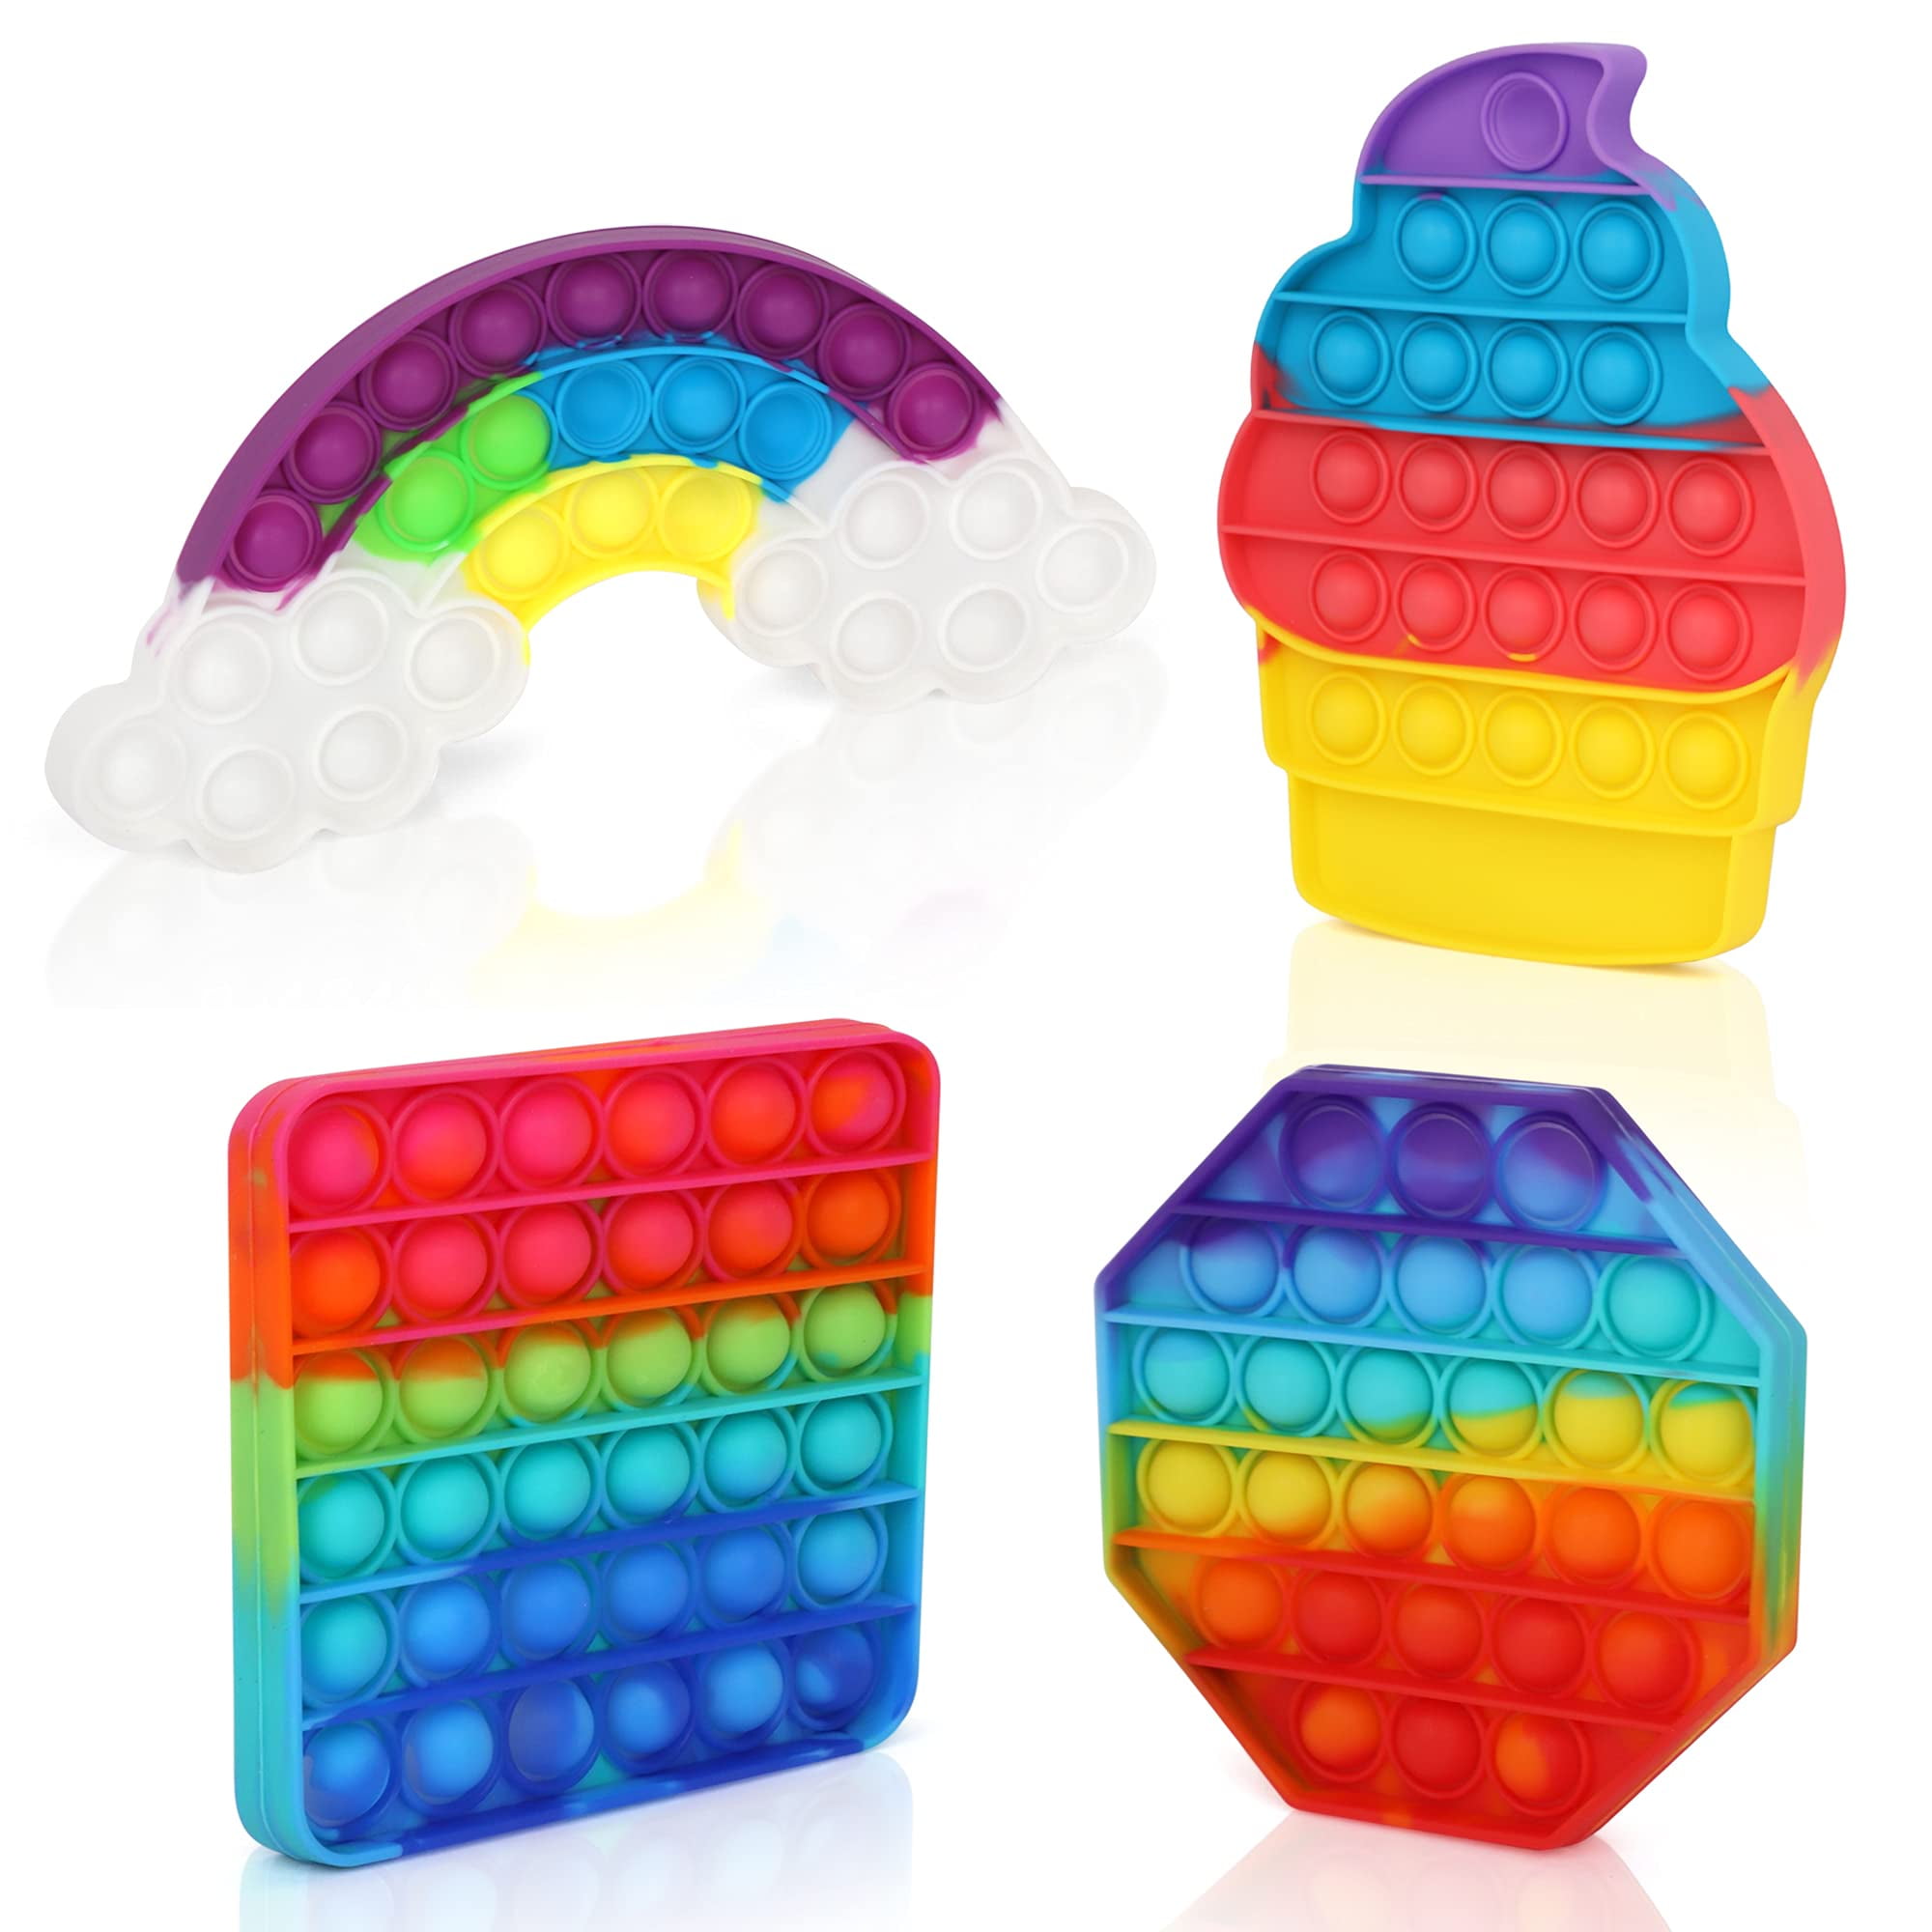 Small Poppit Anti-Anxiety Stress Relief Toys Set with Keychain,Silicone Rainbow Fidget Popper Desk Toy as Gifts for Kids and Student 40 PCS Mini Push Pop Bubble It Fidget Sensory Toy 